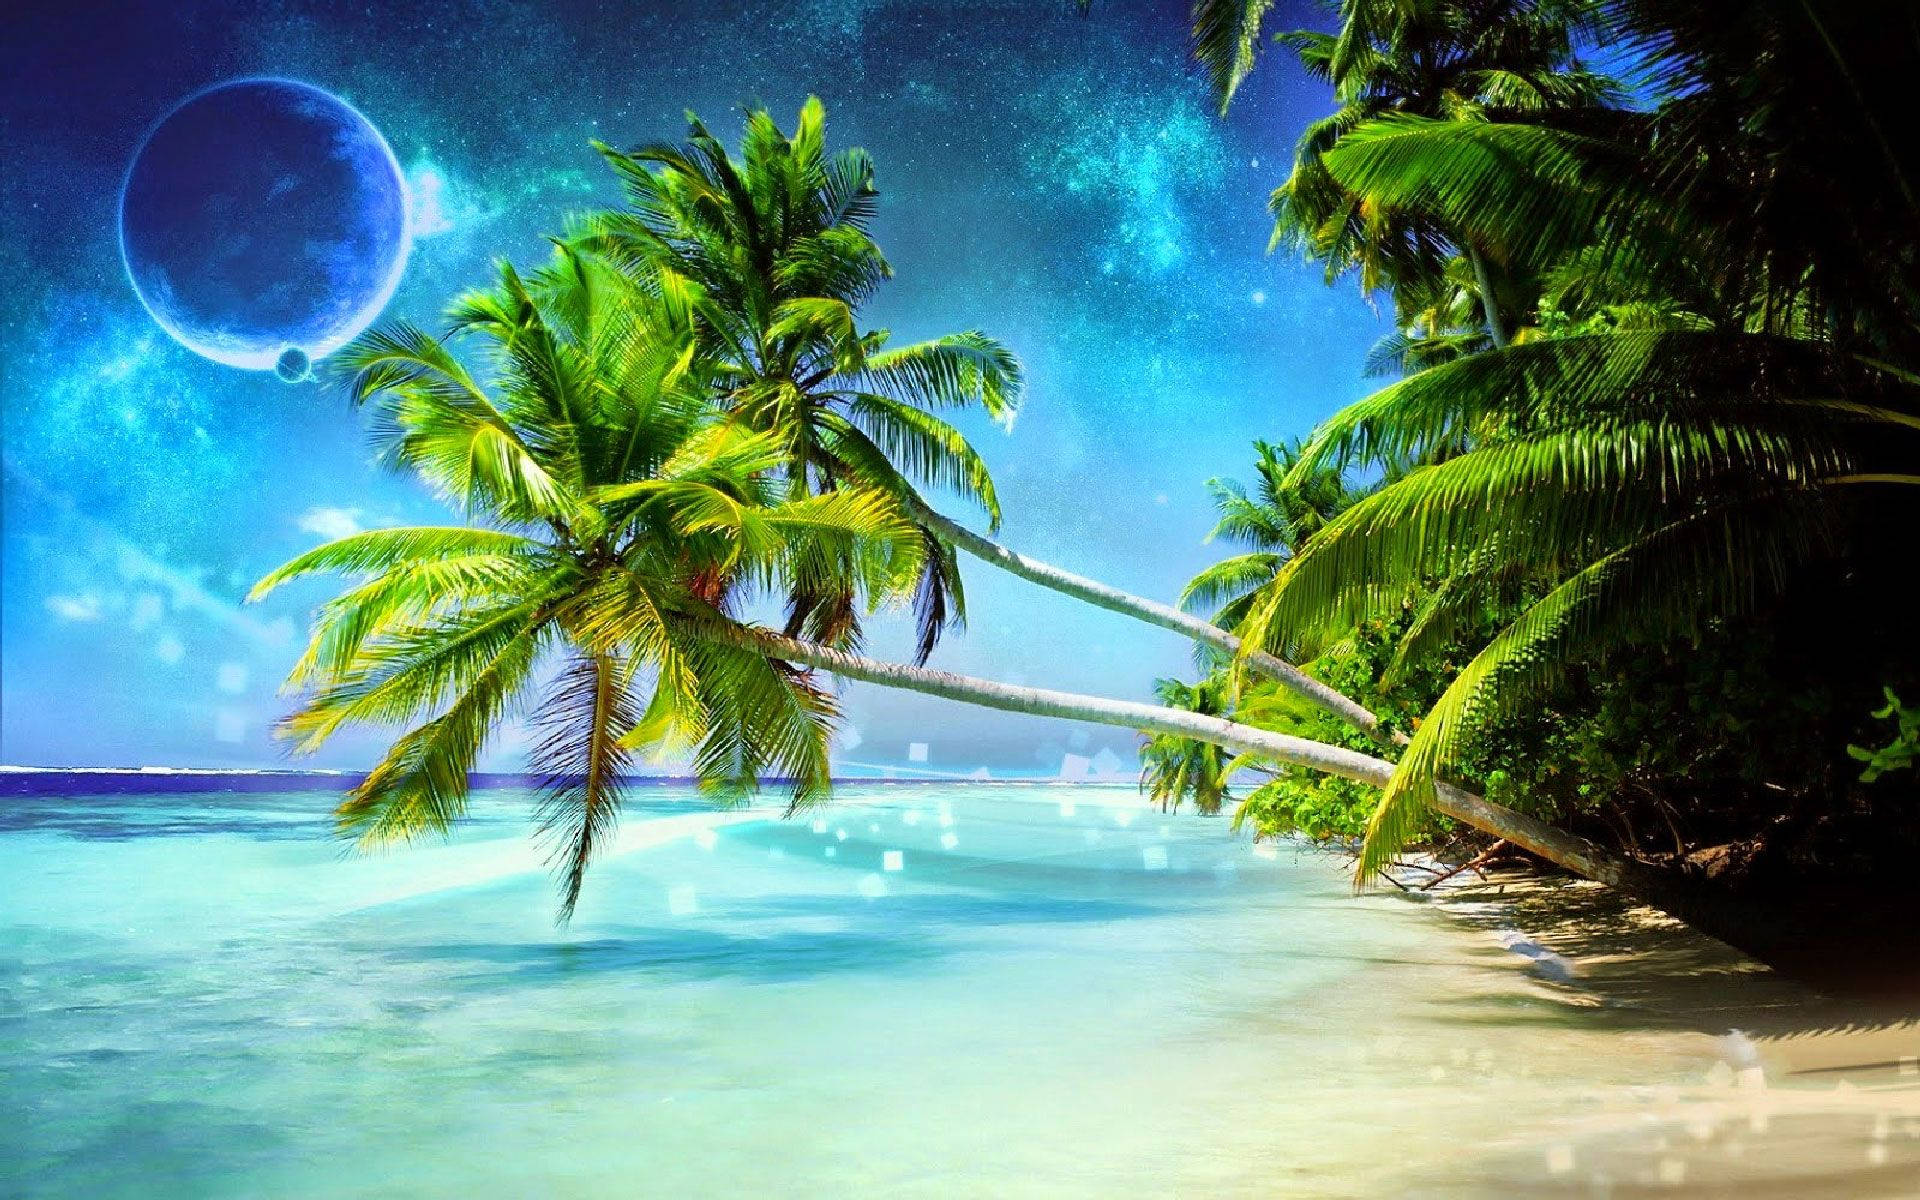 Relaxing On A Sunny Beach Surrounded By 3d Coconut Trees Wallpaper